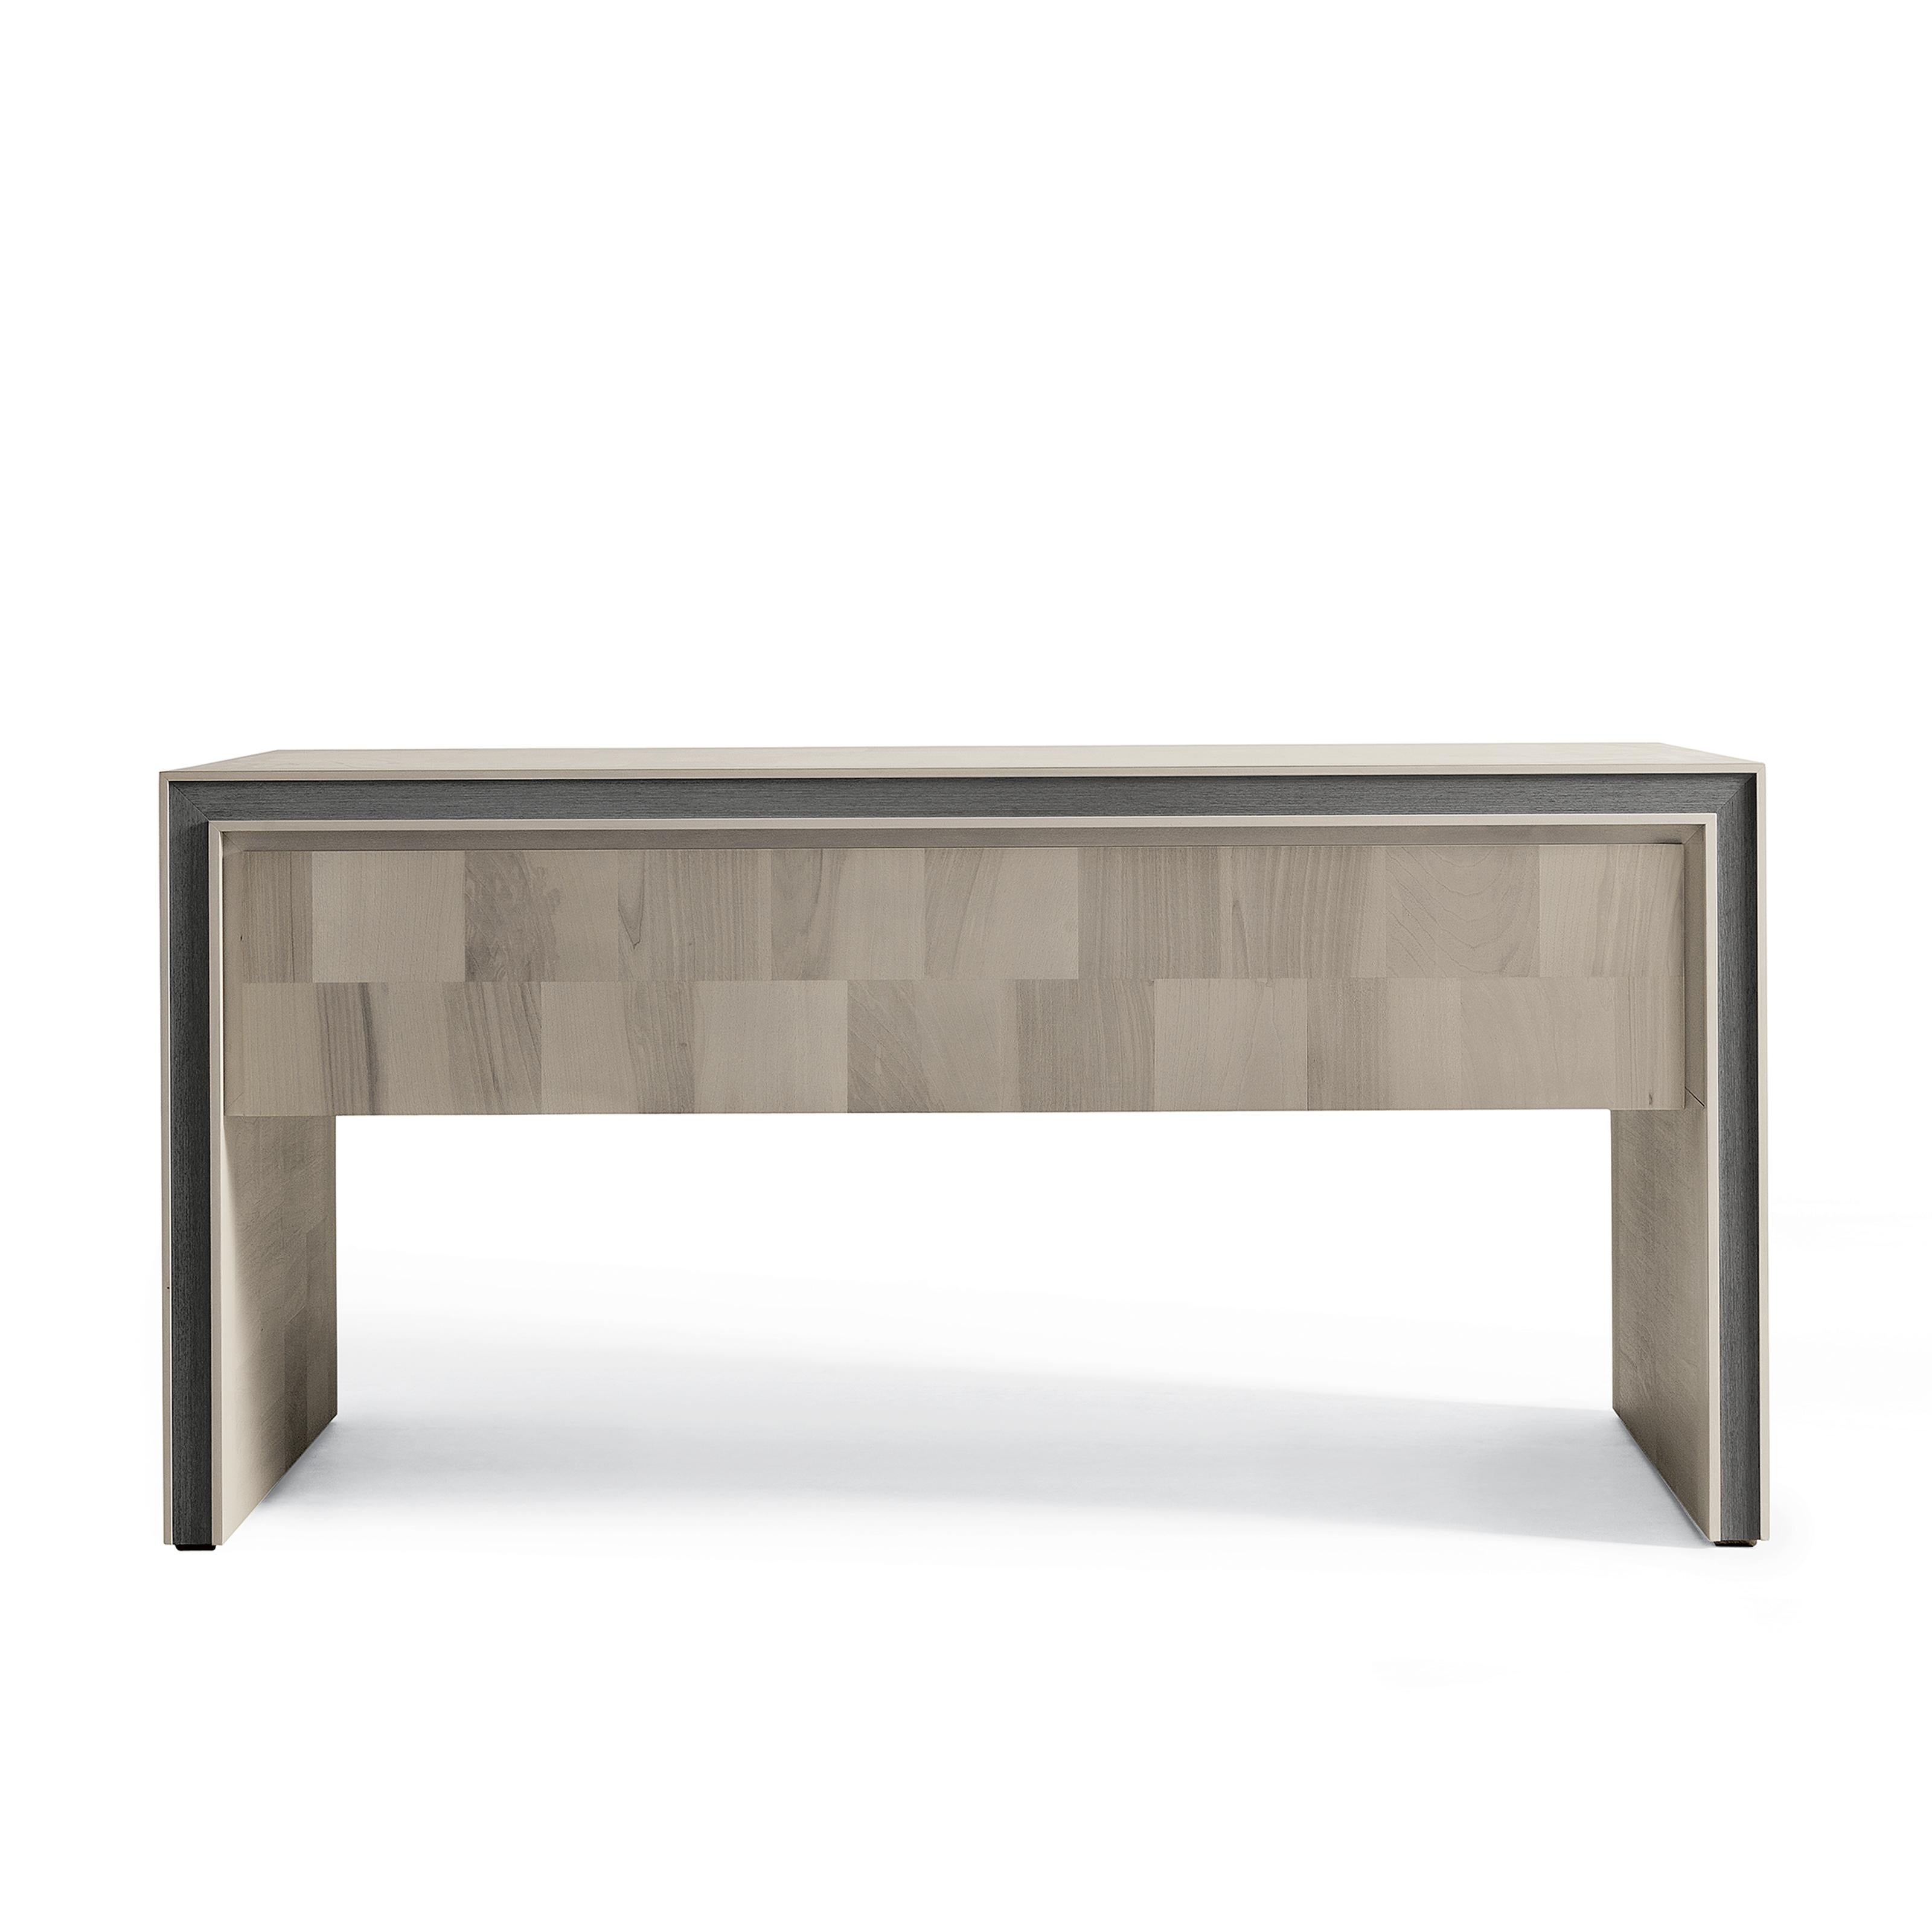 Modern Gentile Solid Wood Desk, Walnut in Hand-Made Natural grey Finish, Contemporary For Sale